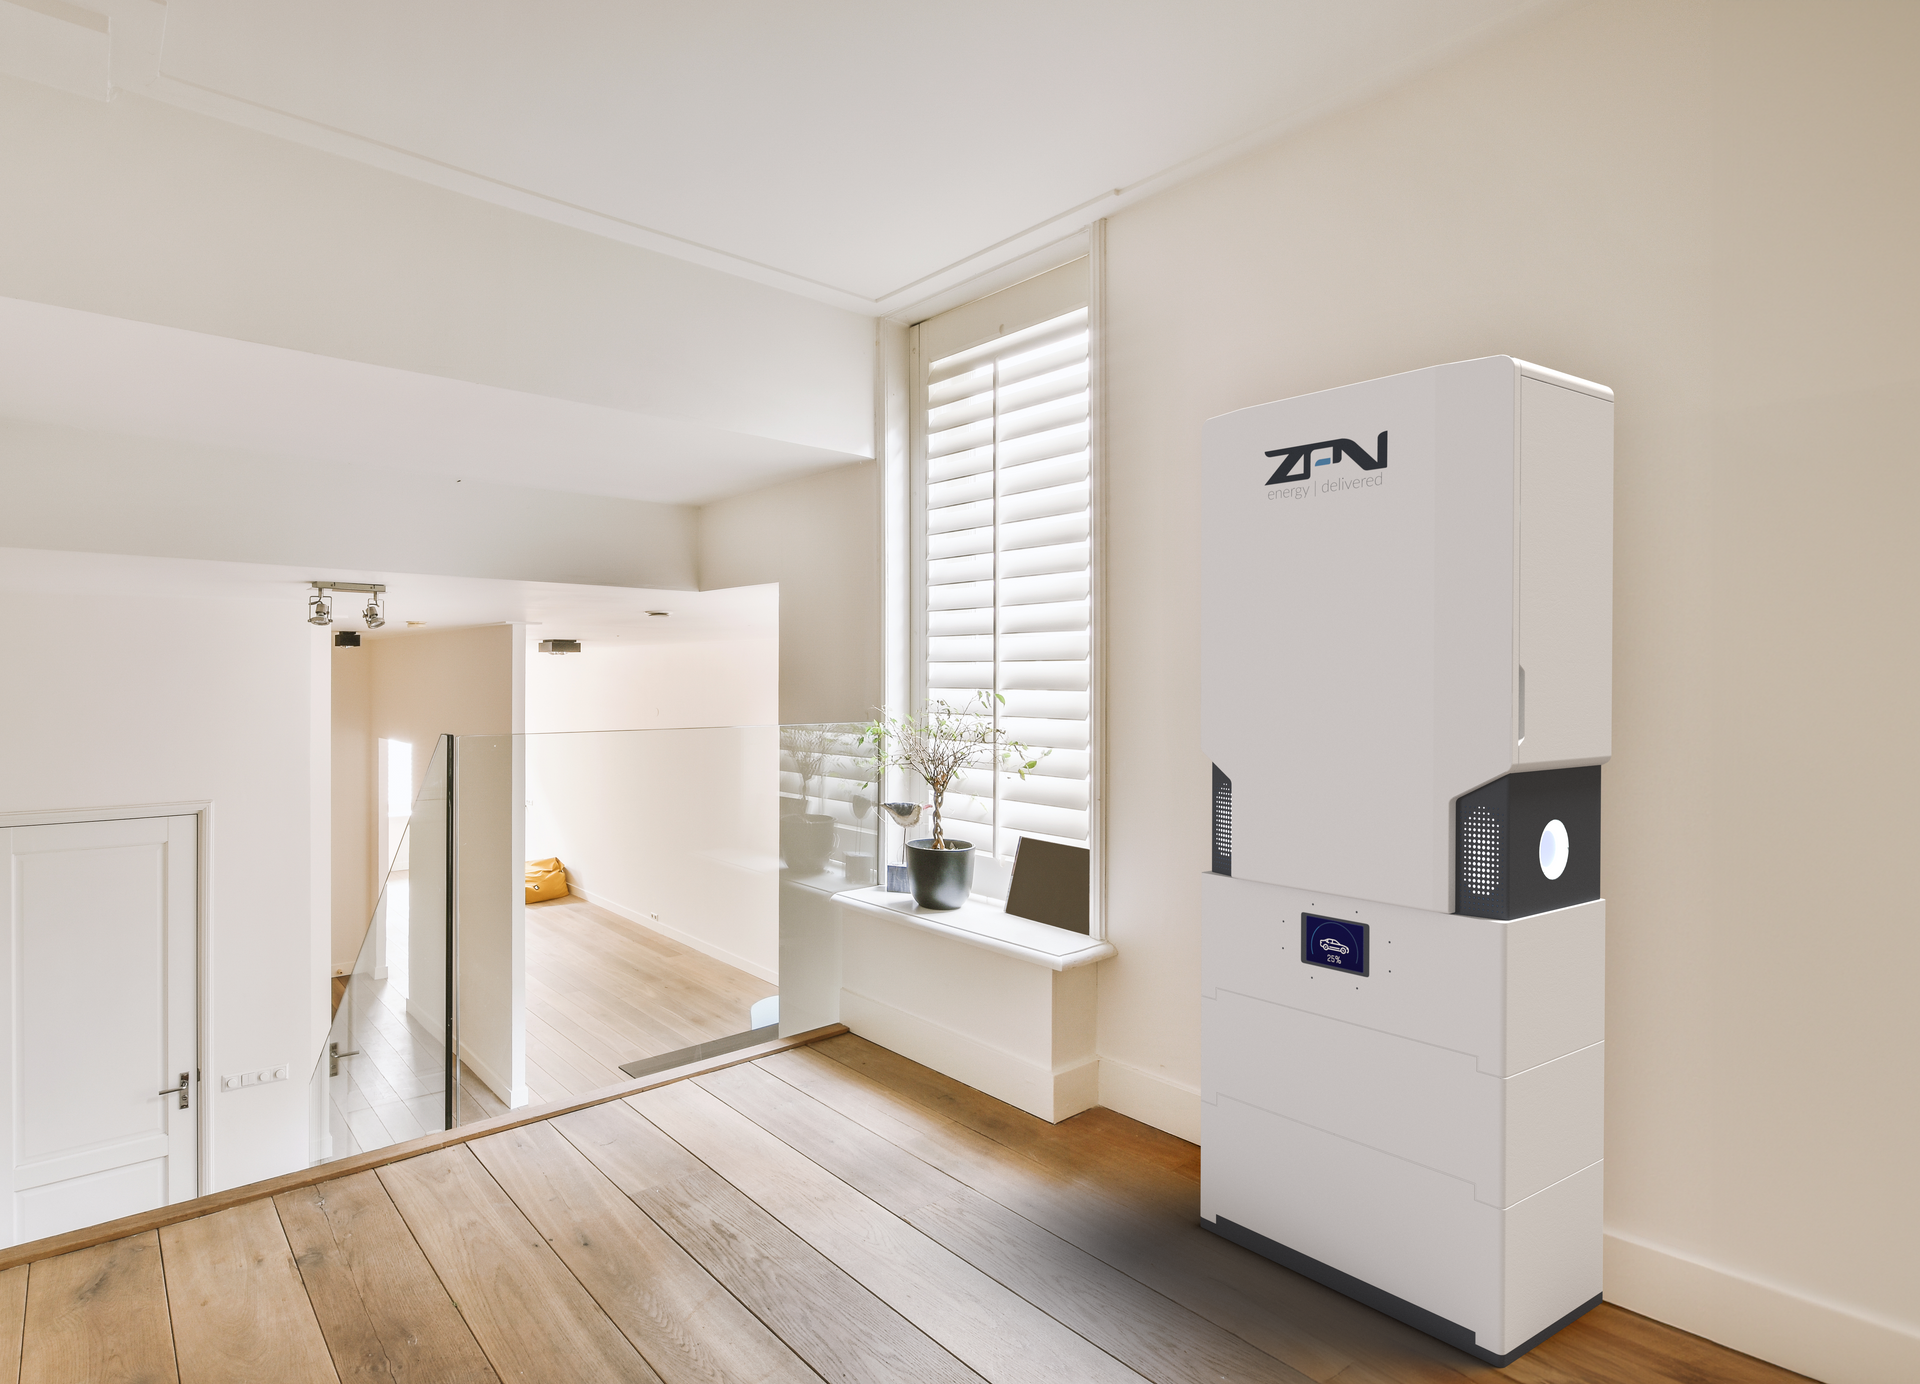 ZPN home, home energy system